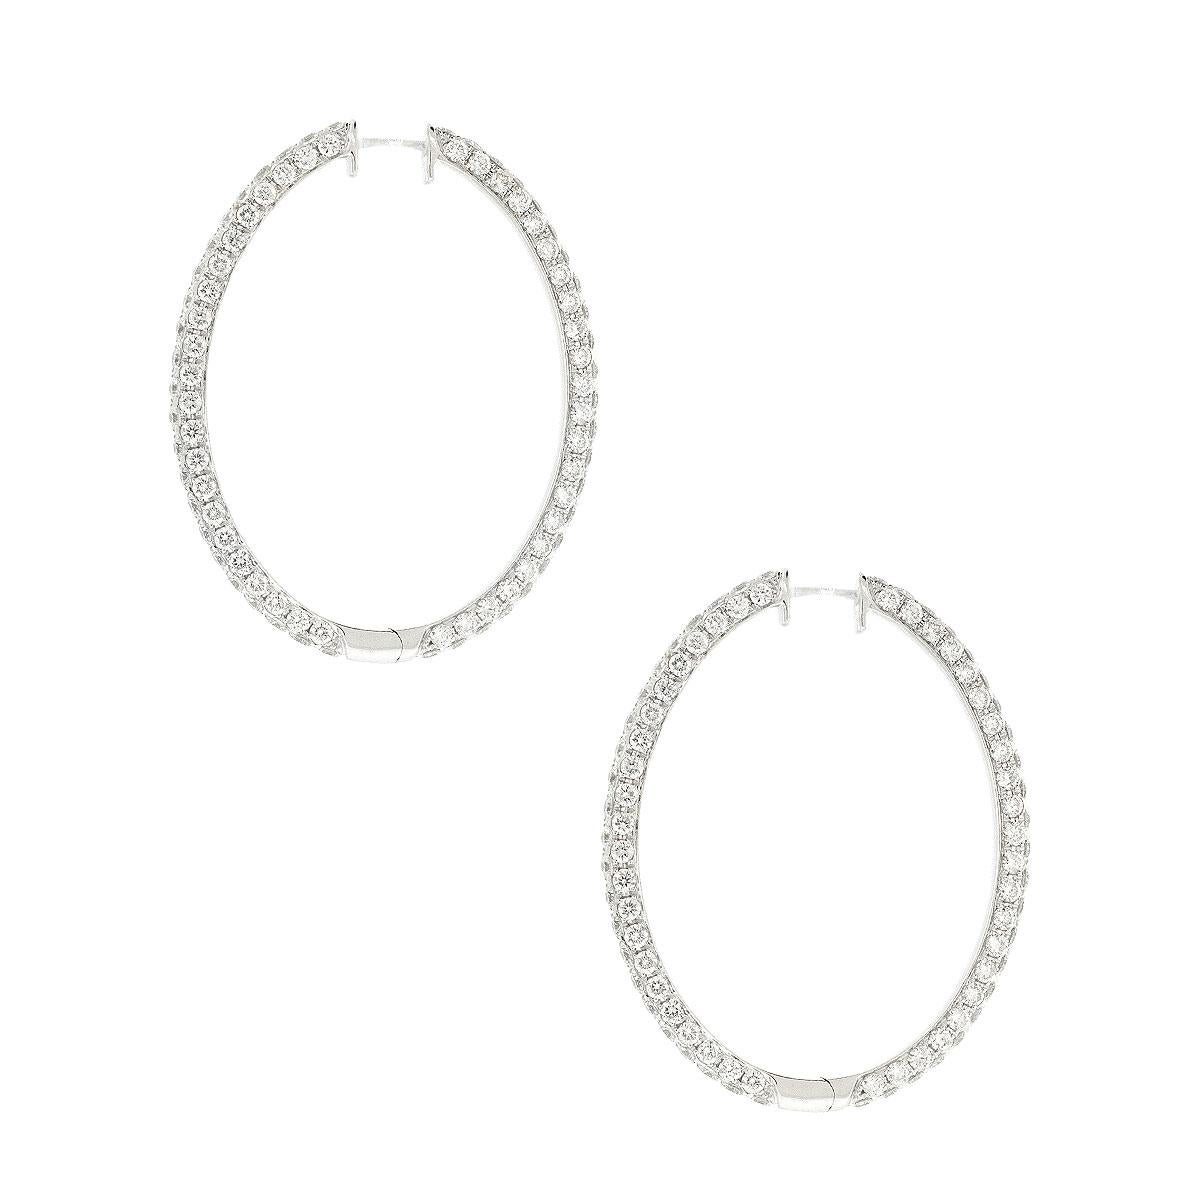 8.29 Carat Diamond Pave Oval Hoop Earrings 18 Karat In Excellent Condition For Sale In Boca Raton, FL